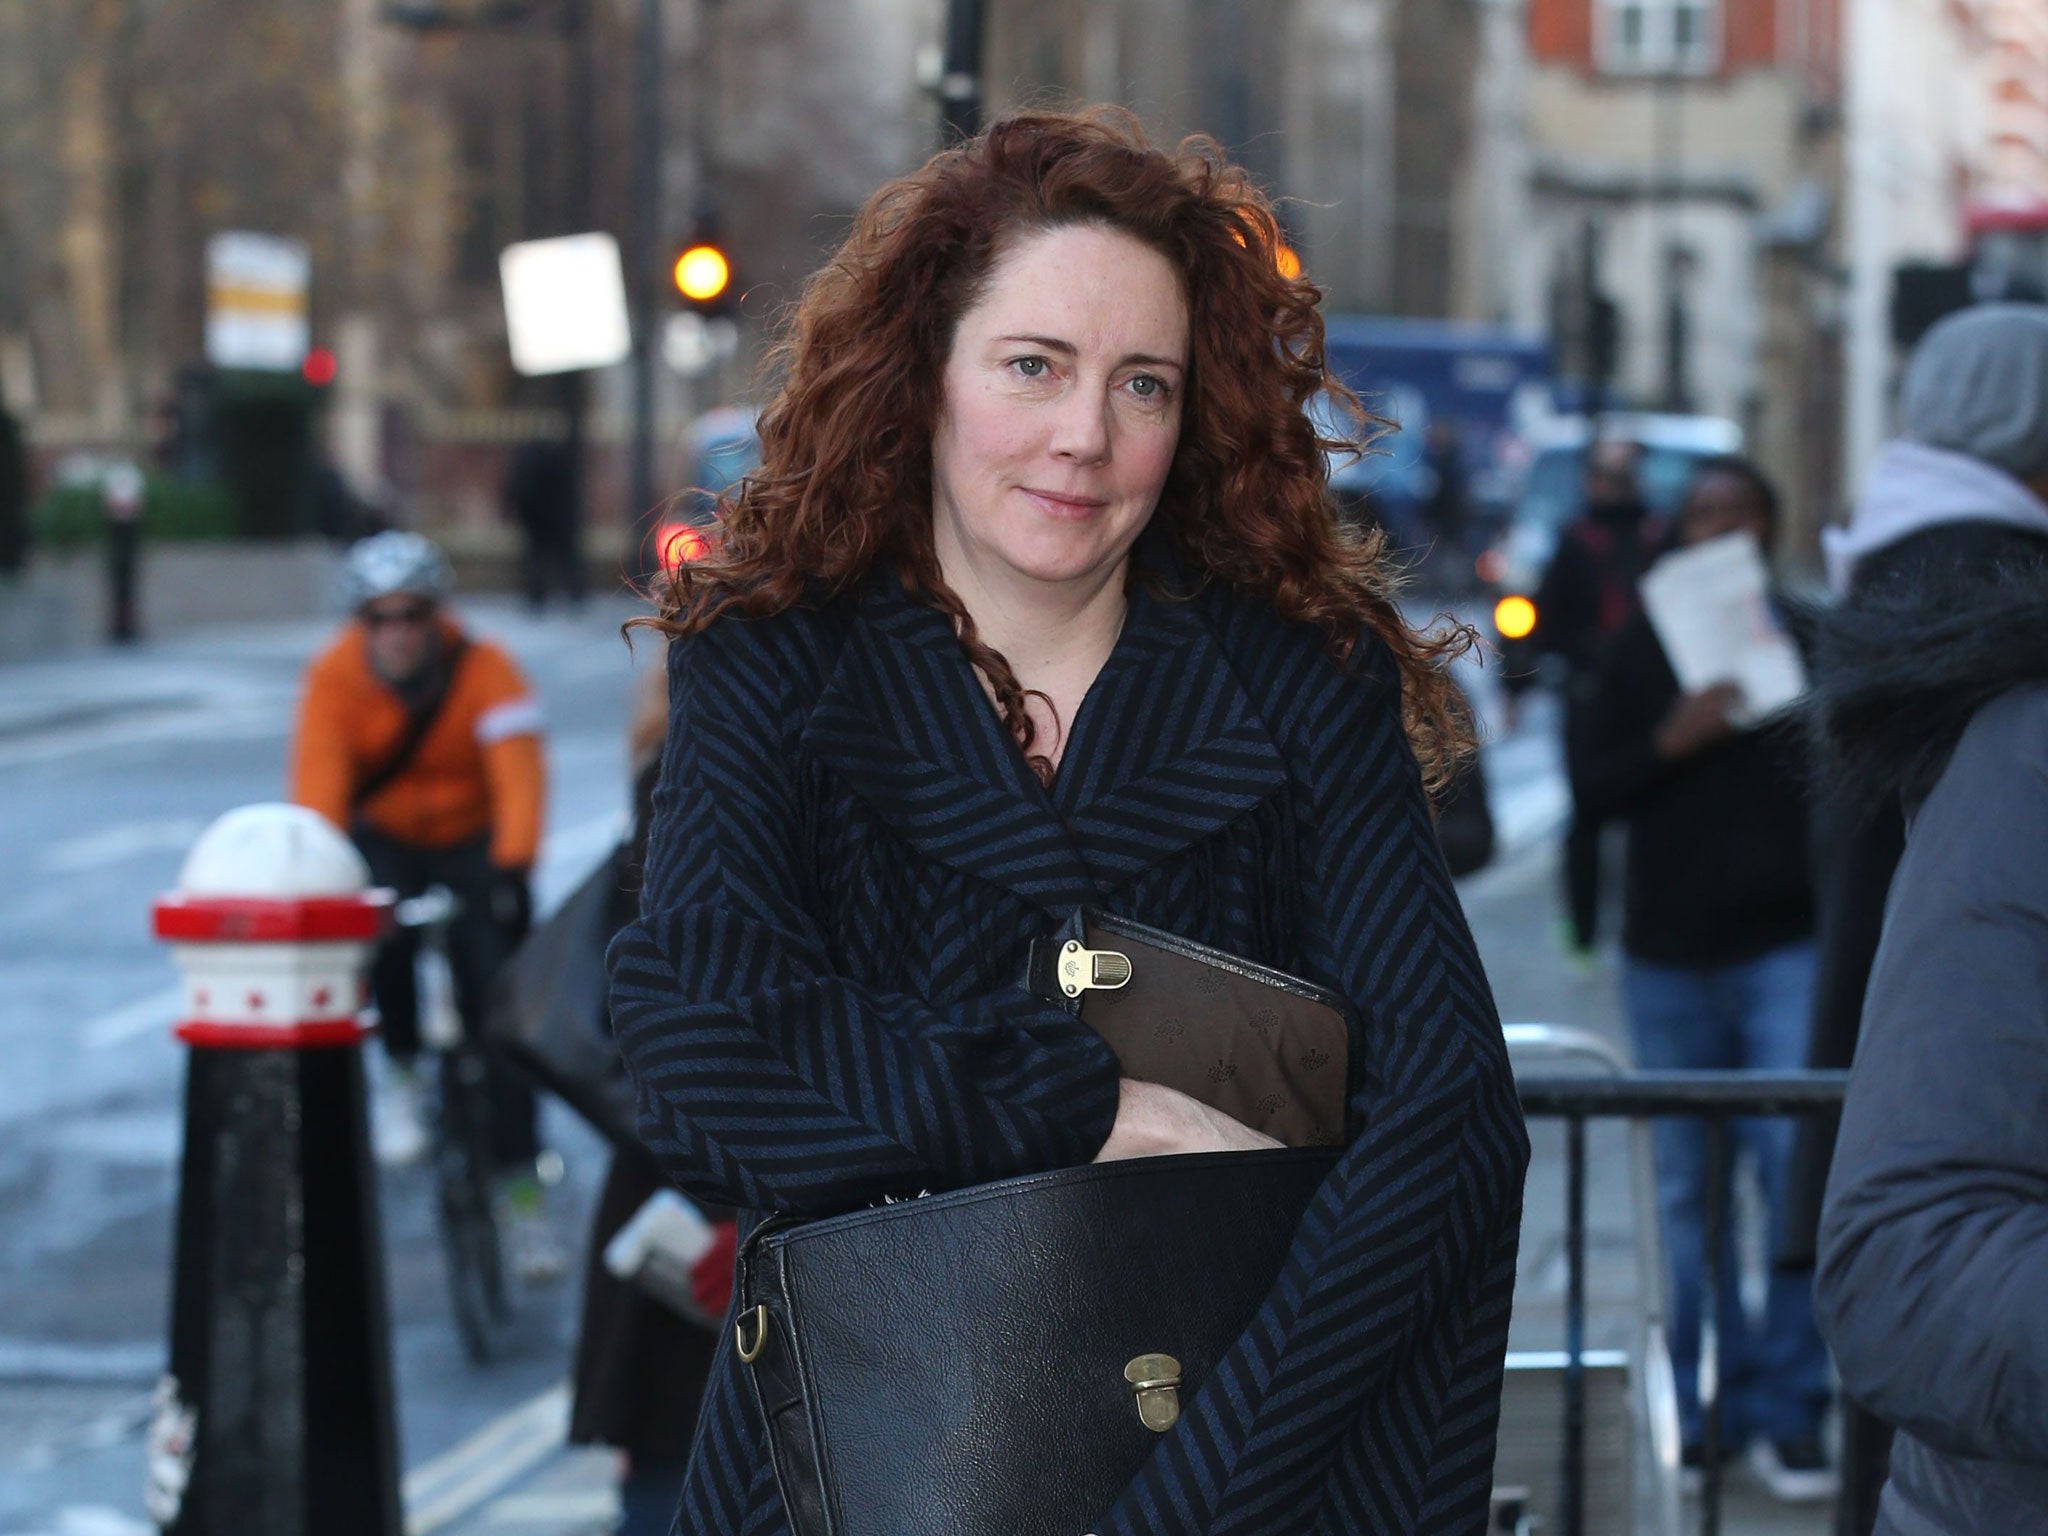 CCTV footage of Rebekah Brooks' husband allegedly hiding evidence from the police was shown to the jury